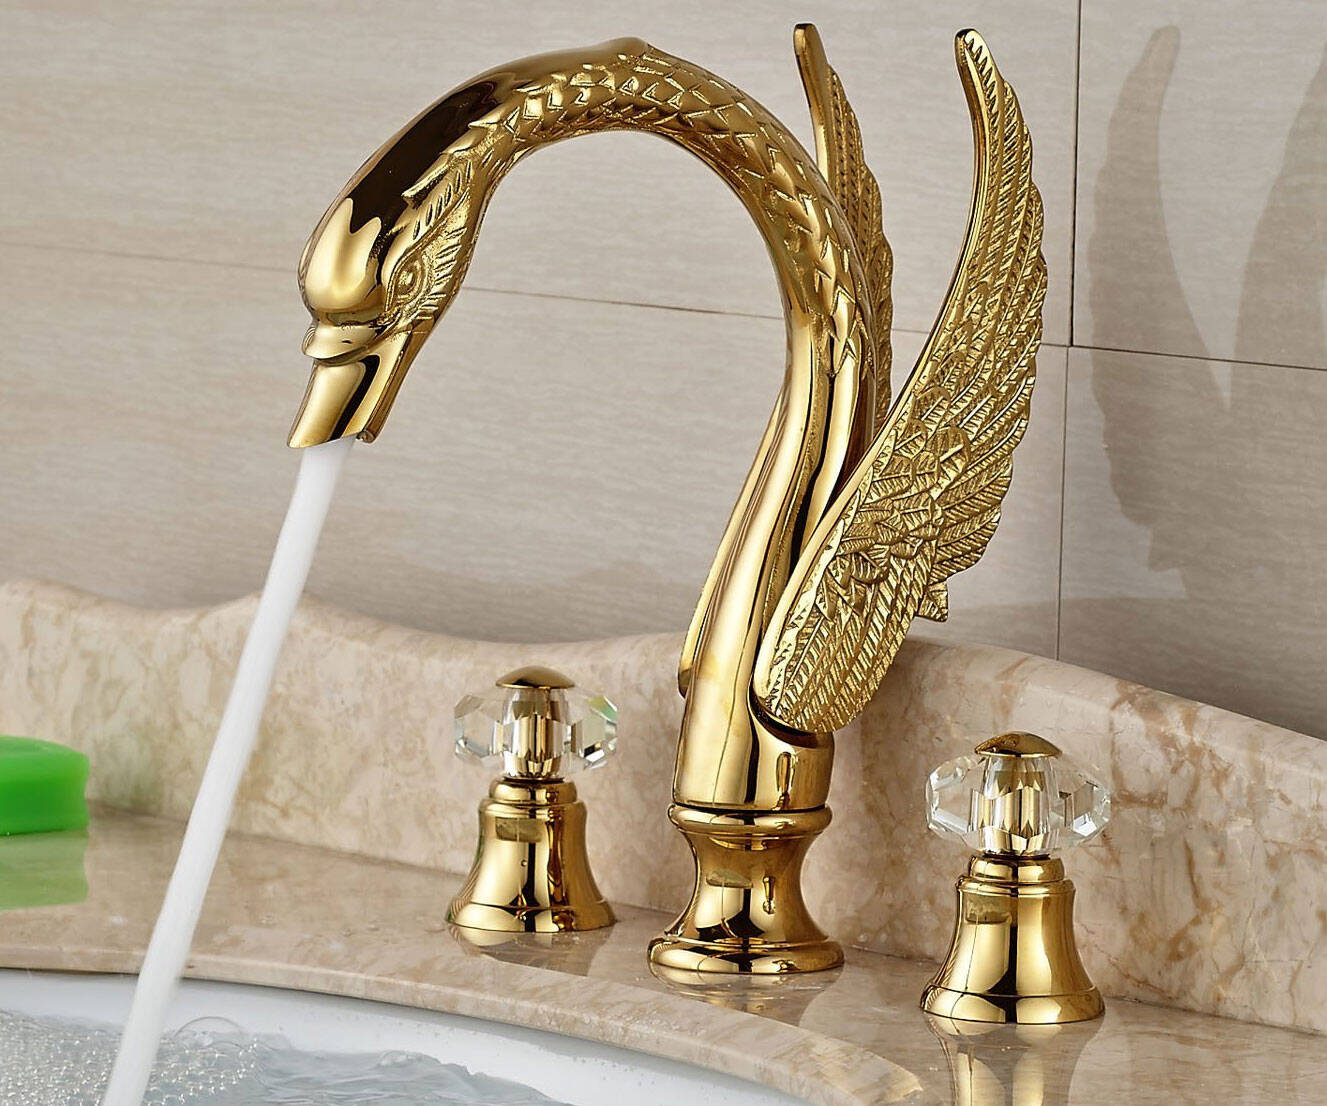 Vomiting Swan Faucet - //coolthings.us